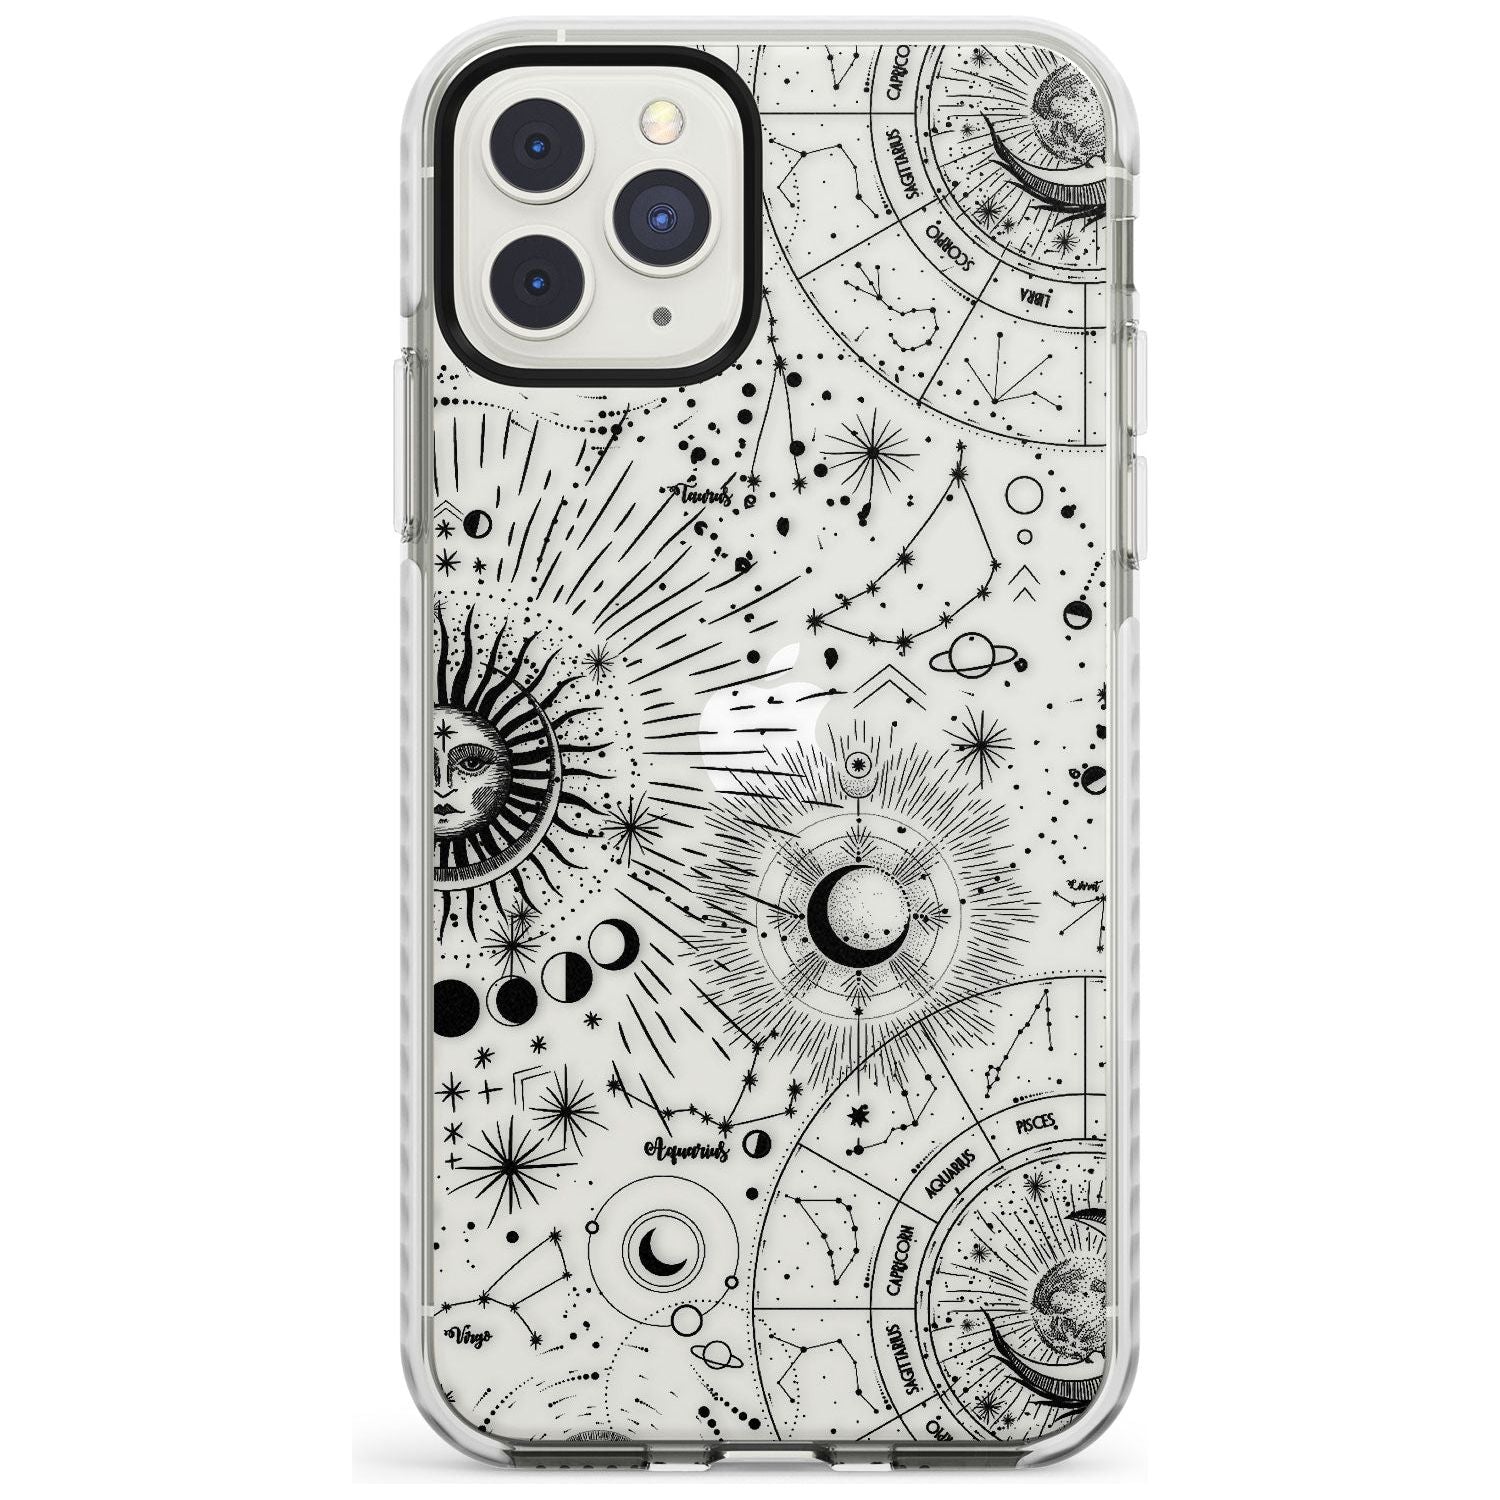 Suns & Constellations Astrological Impact Phone Case for iPhone 11 Pro Max